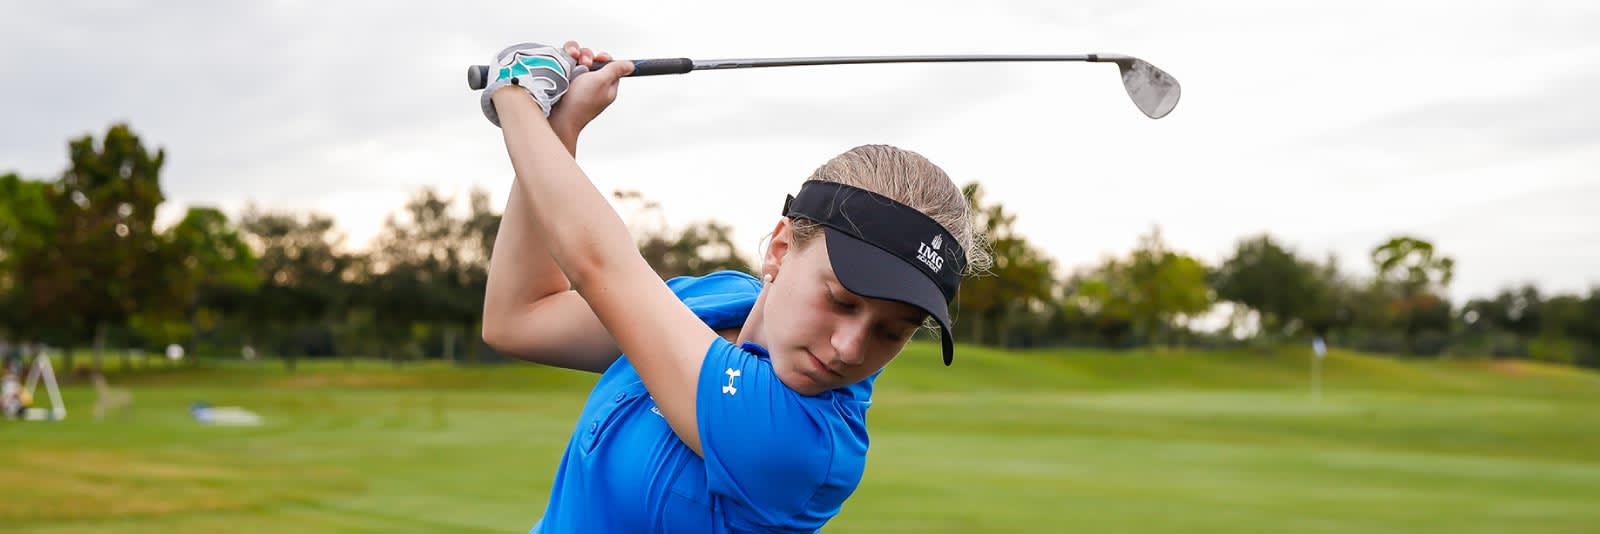 Women's Division 3 Golf Colleges